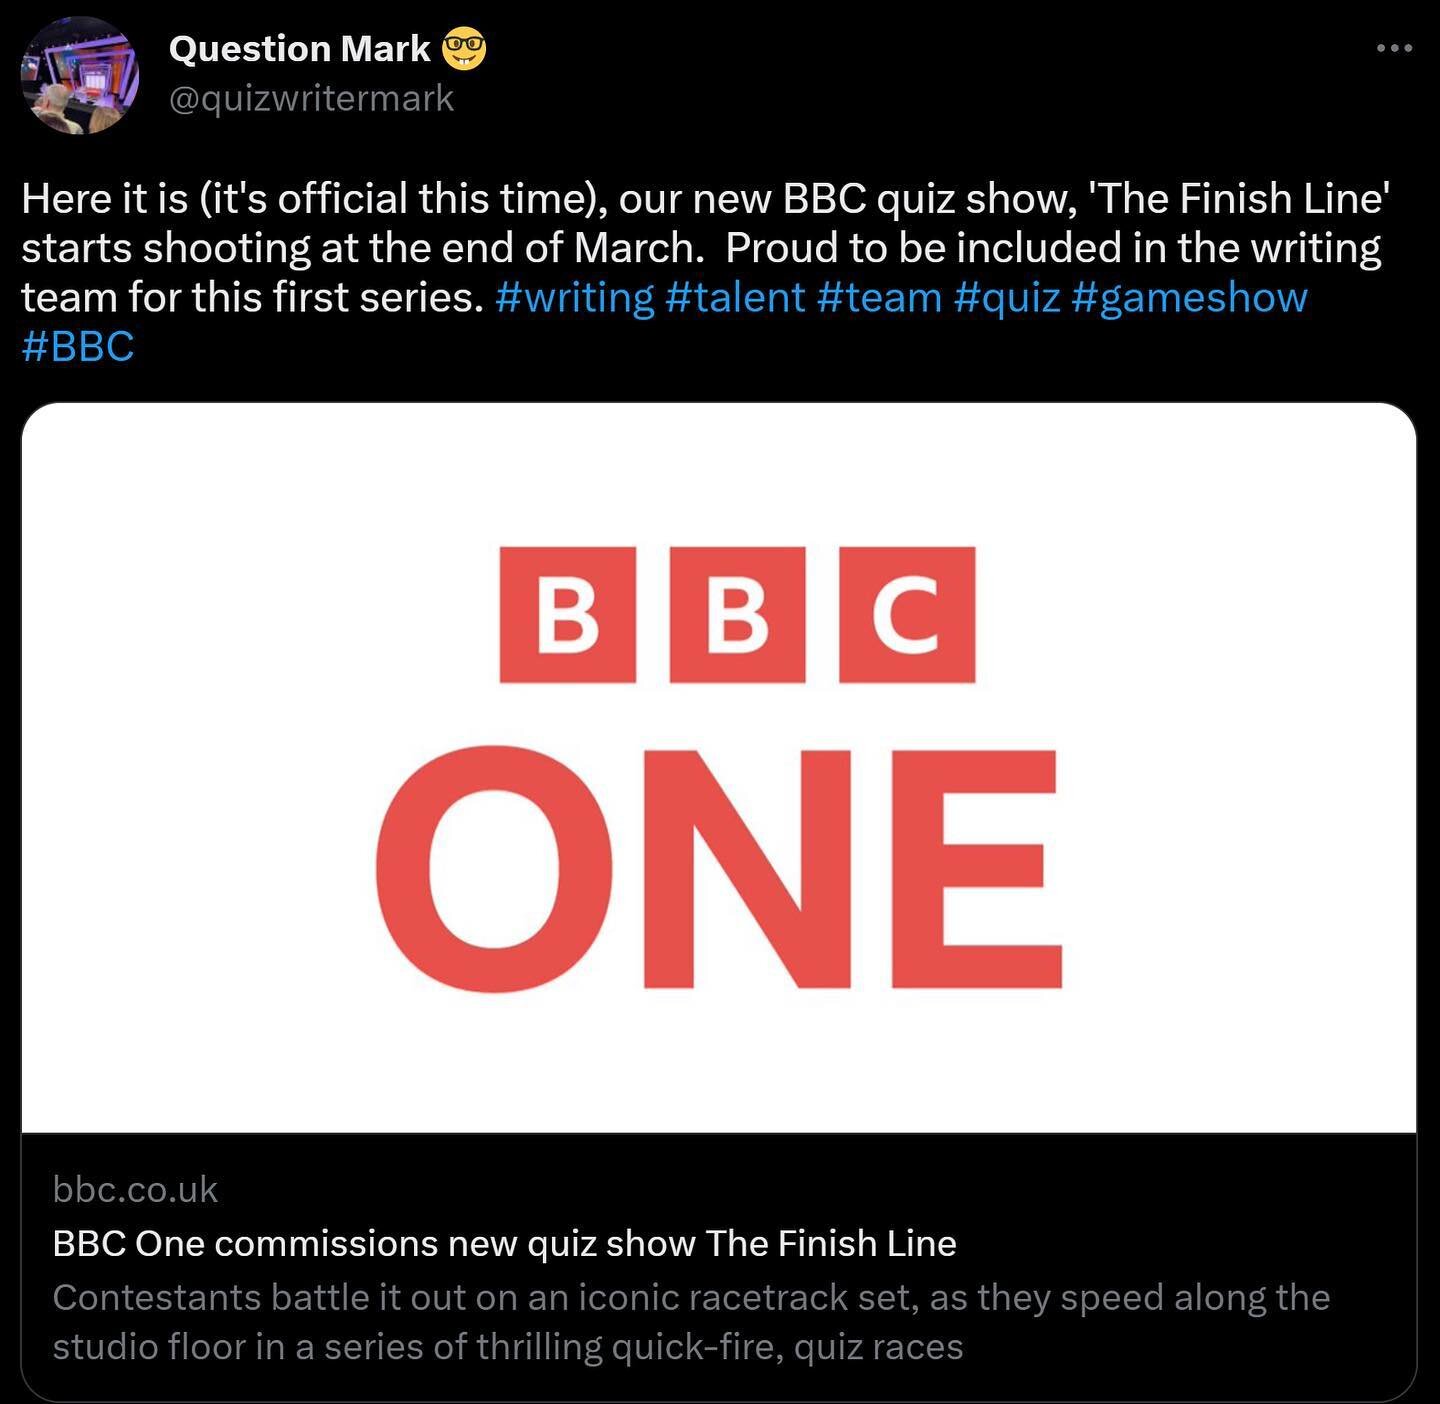 Here it is (it's official this time), our new BBC quiz show, 'The Finish Line' starts shooting at the end of March.  Proud to be included in the writing team for this first series. #writing #talent #team #quiz #gameshow #BBC